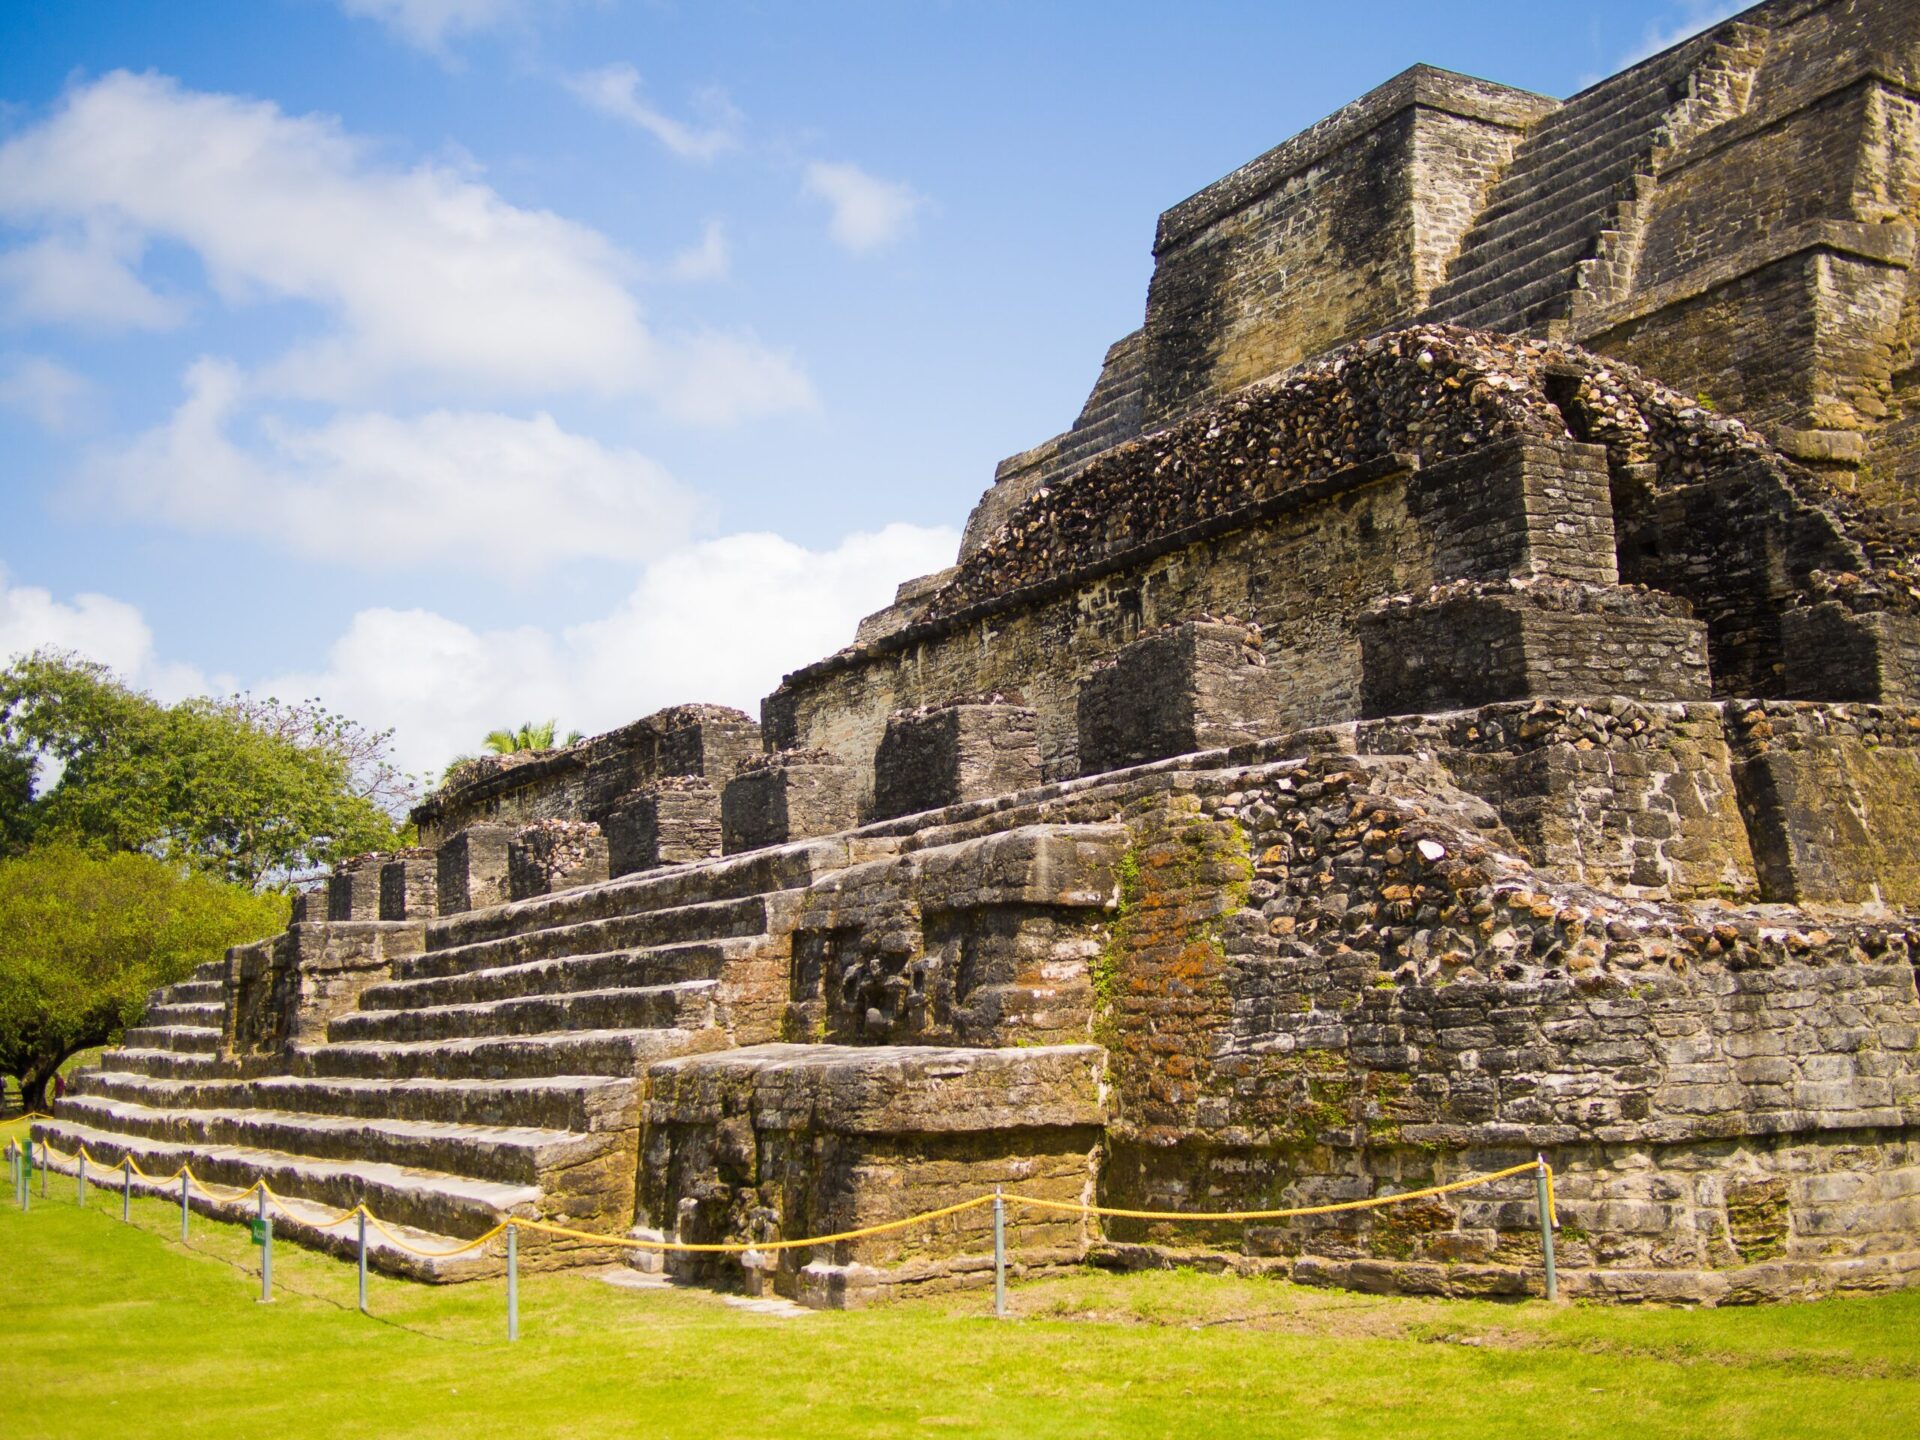 Photography Locations in Belize